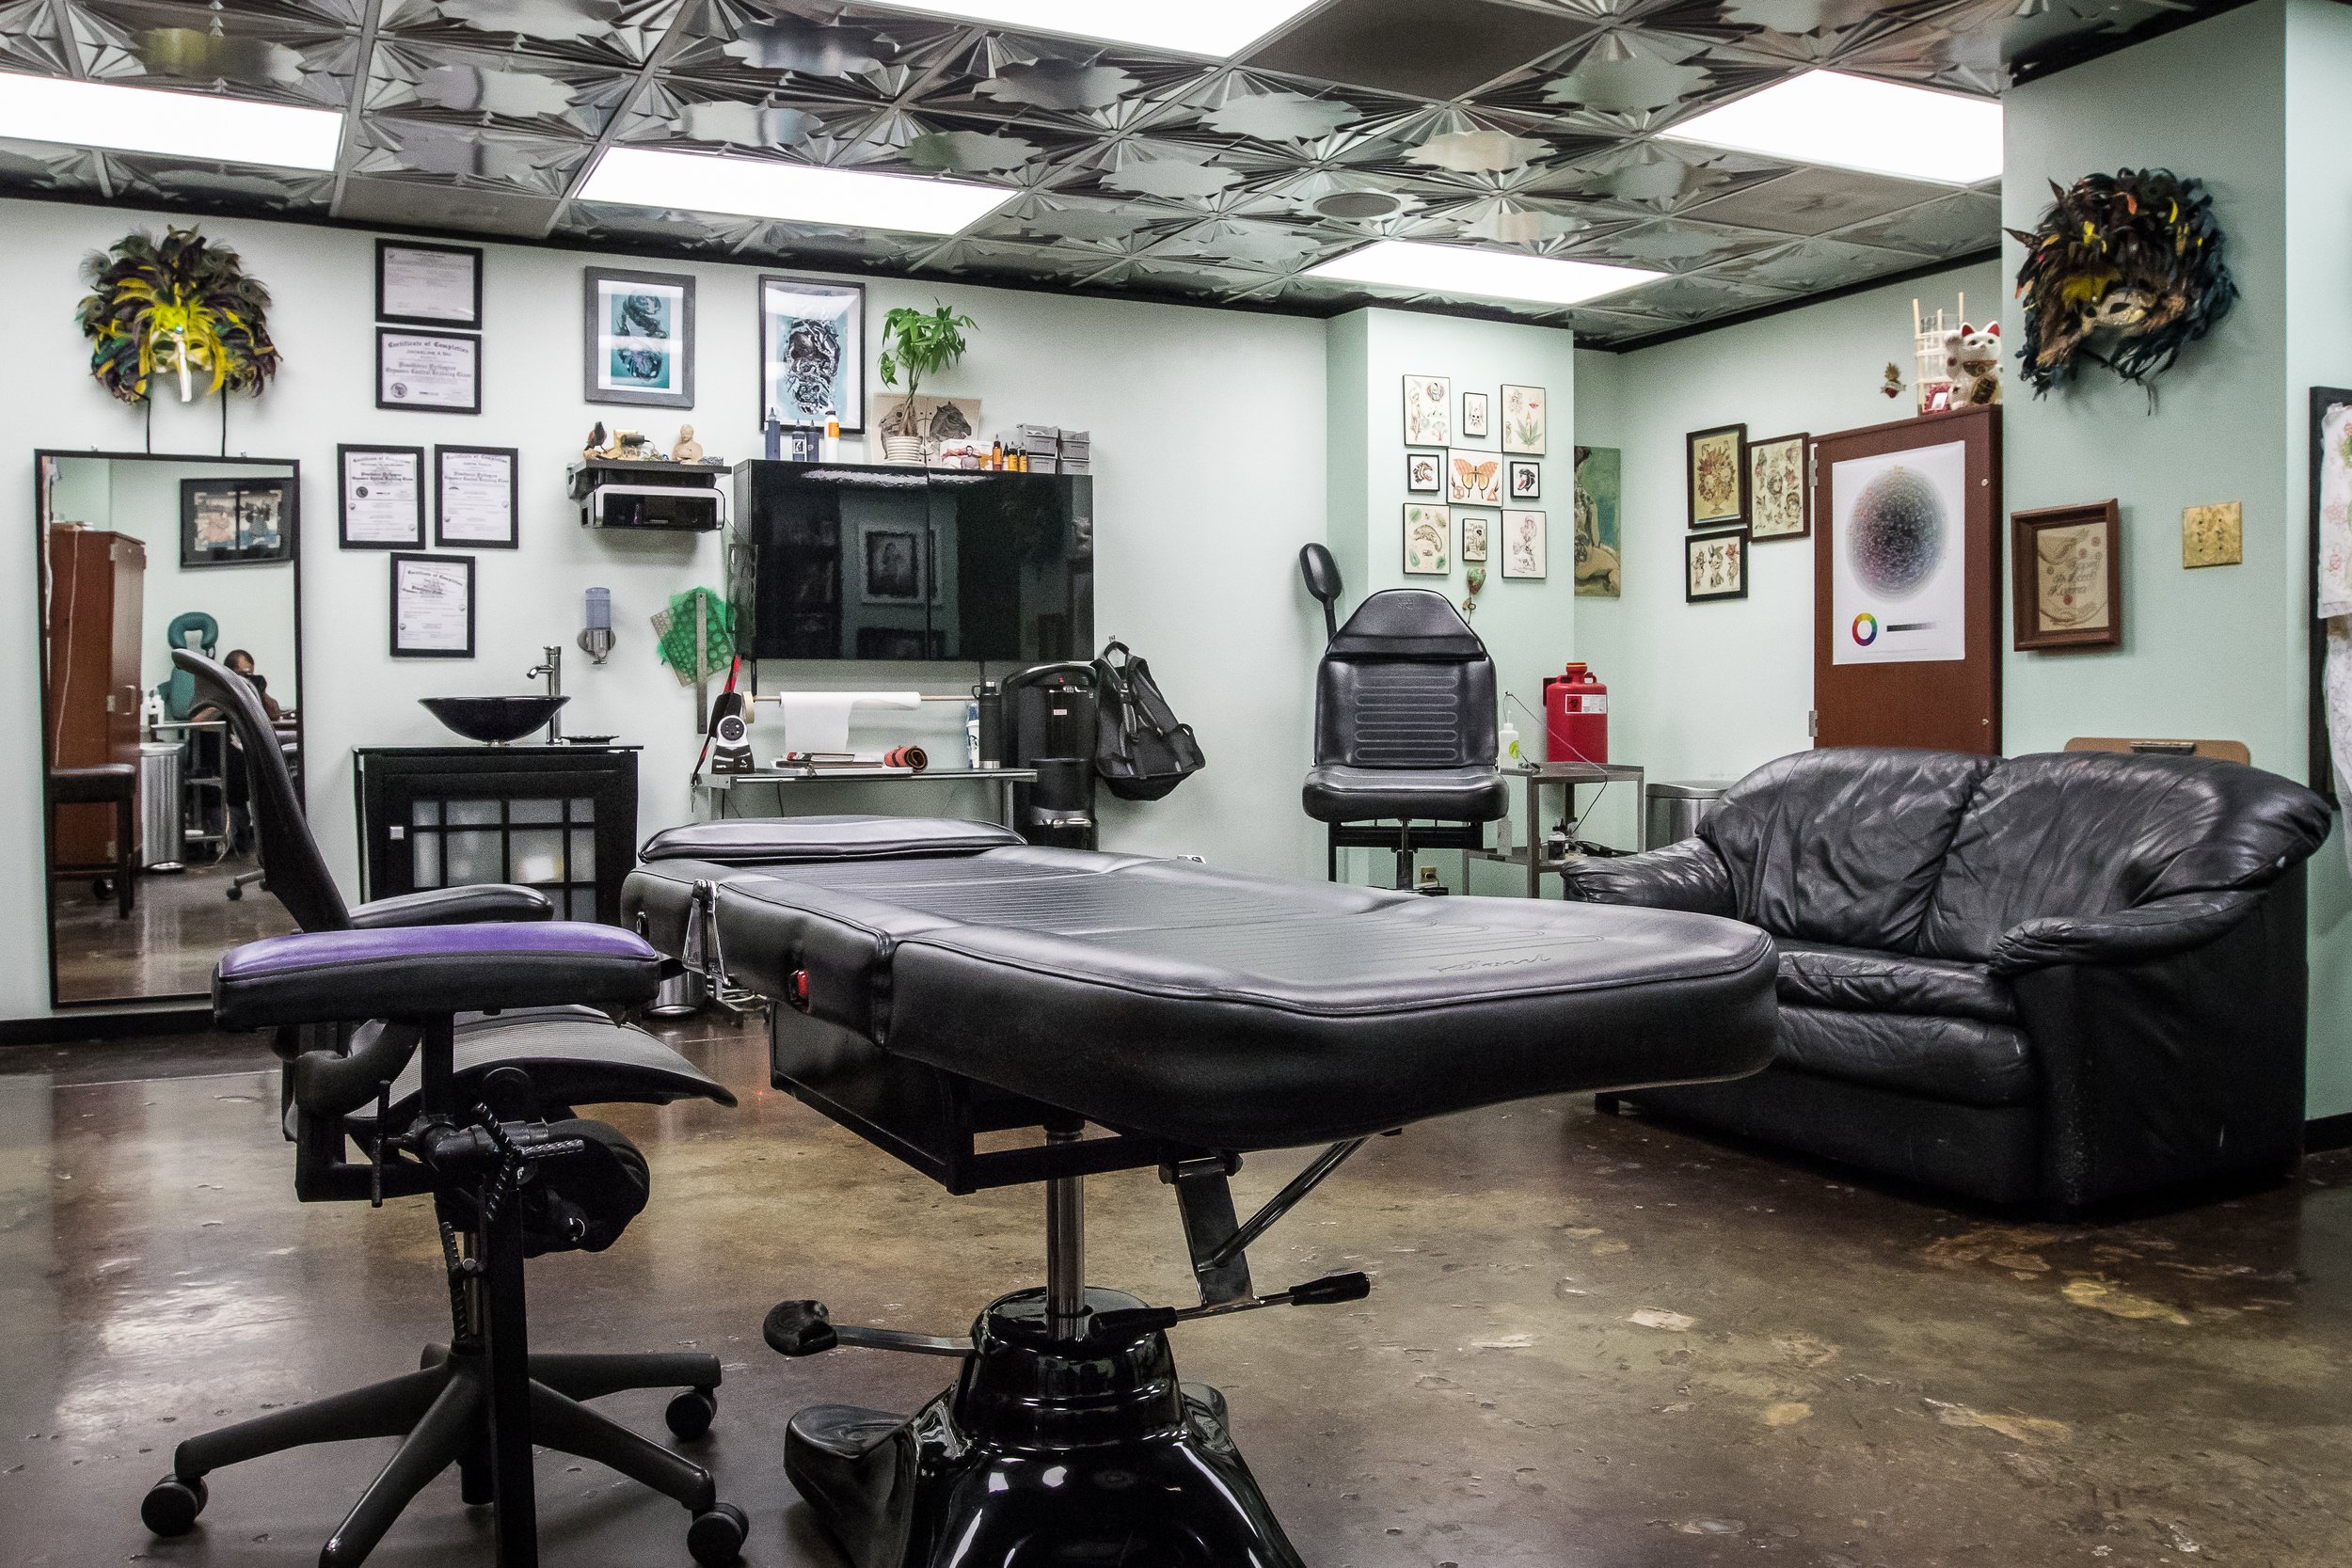 About RedTree Tattoo Gallery